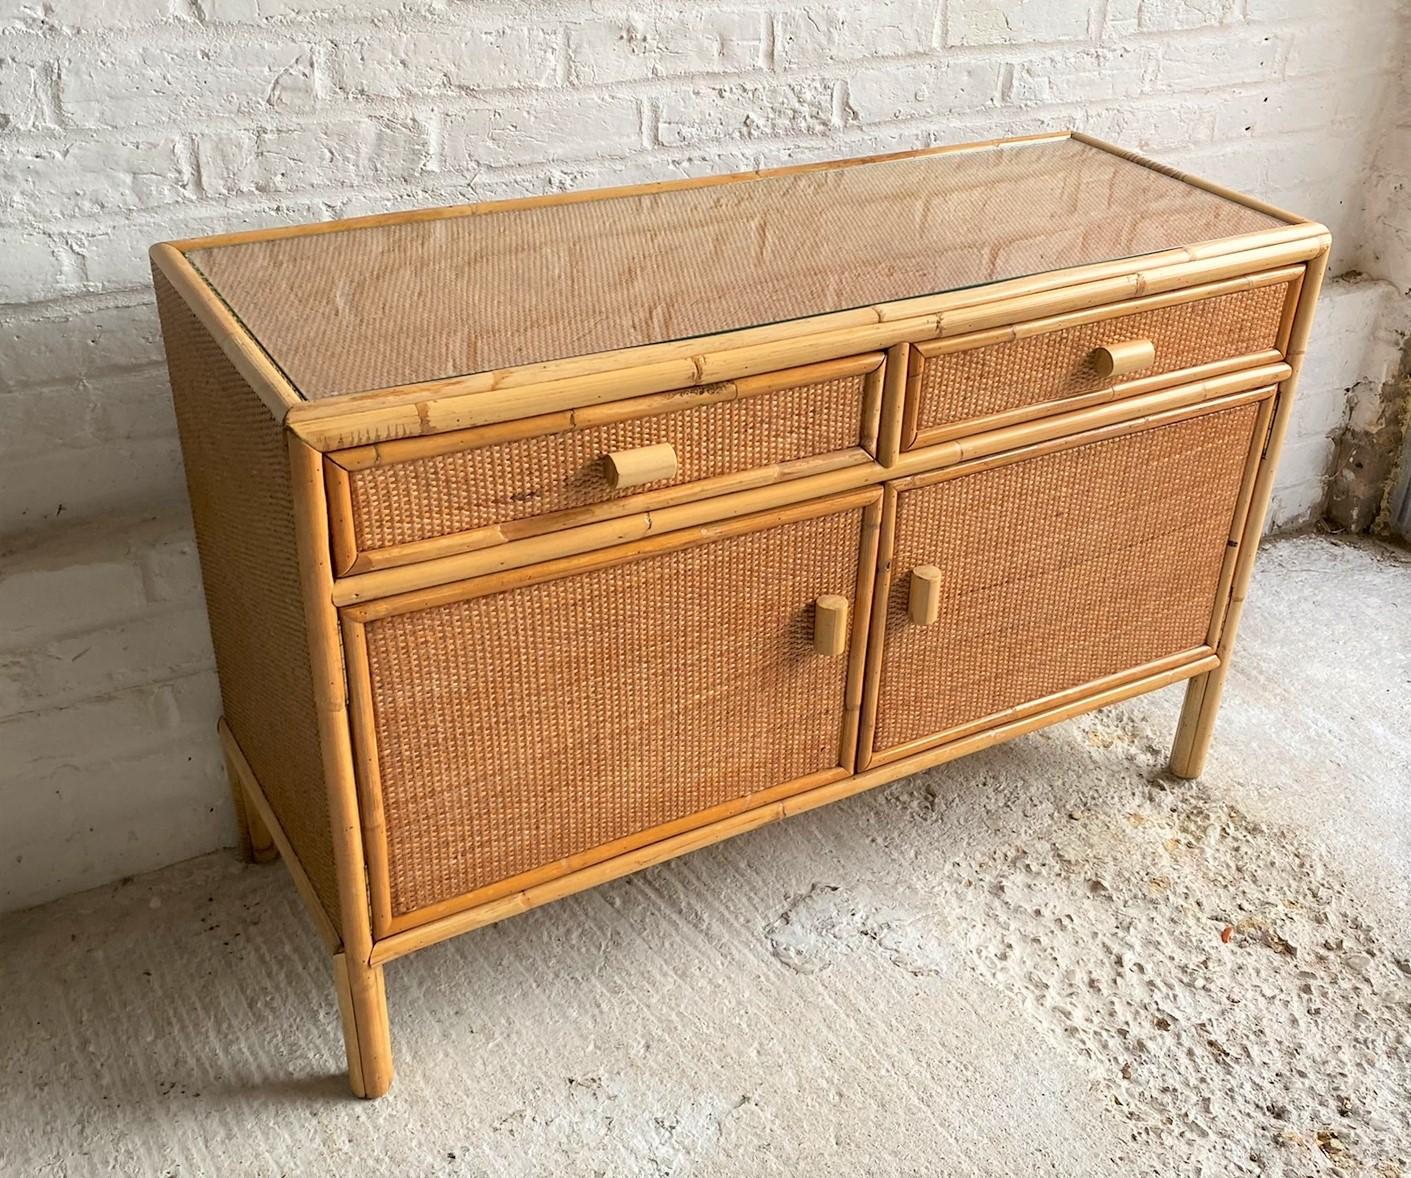 Mid century rattan / bamboo compact sideboard, Italy, 1970s

Mid century rattan / bamboo compact sideboard, wooden structure with rattan and cane detail, covered in close weave French matting, with cane handles. Two drawers above a two door